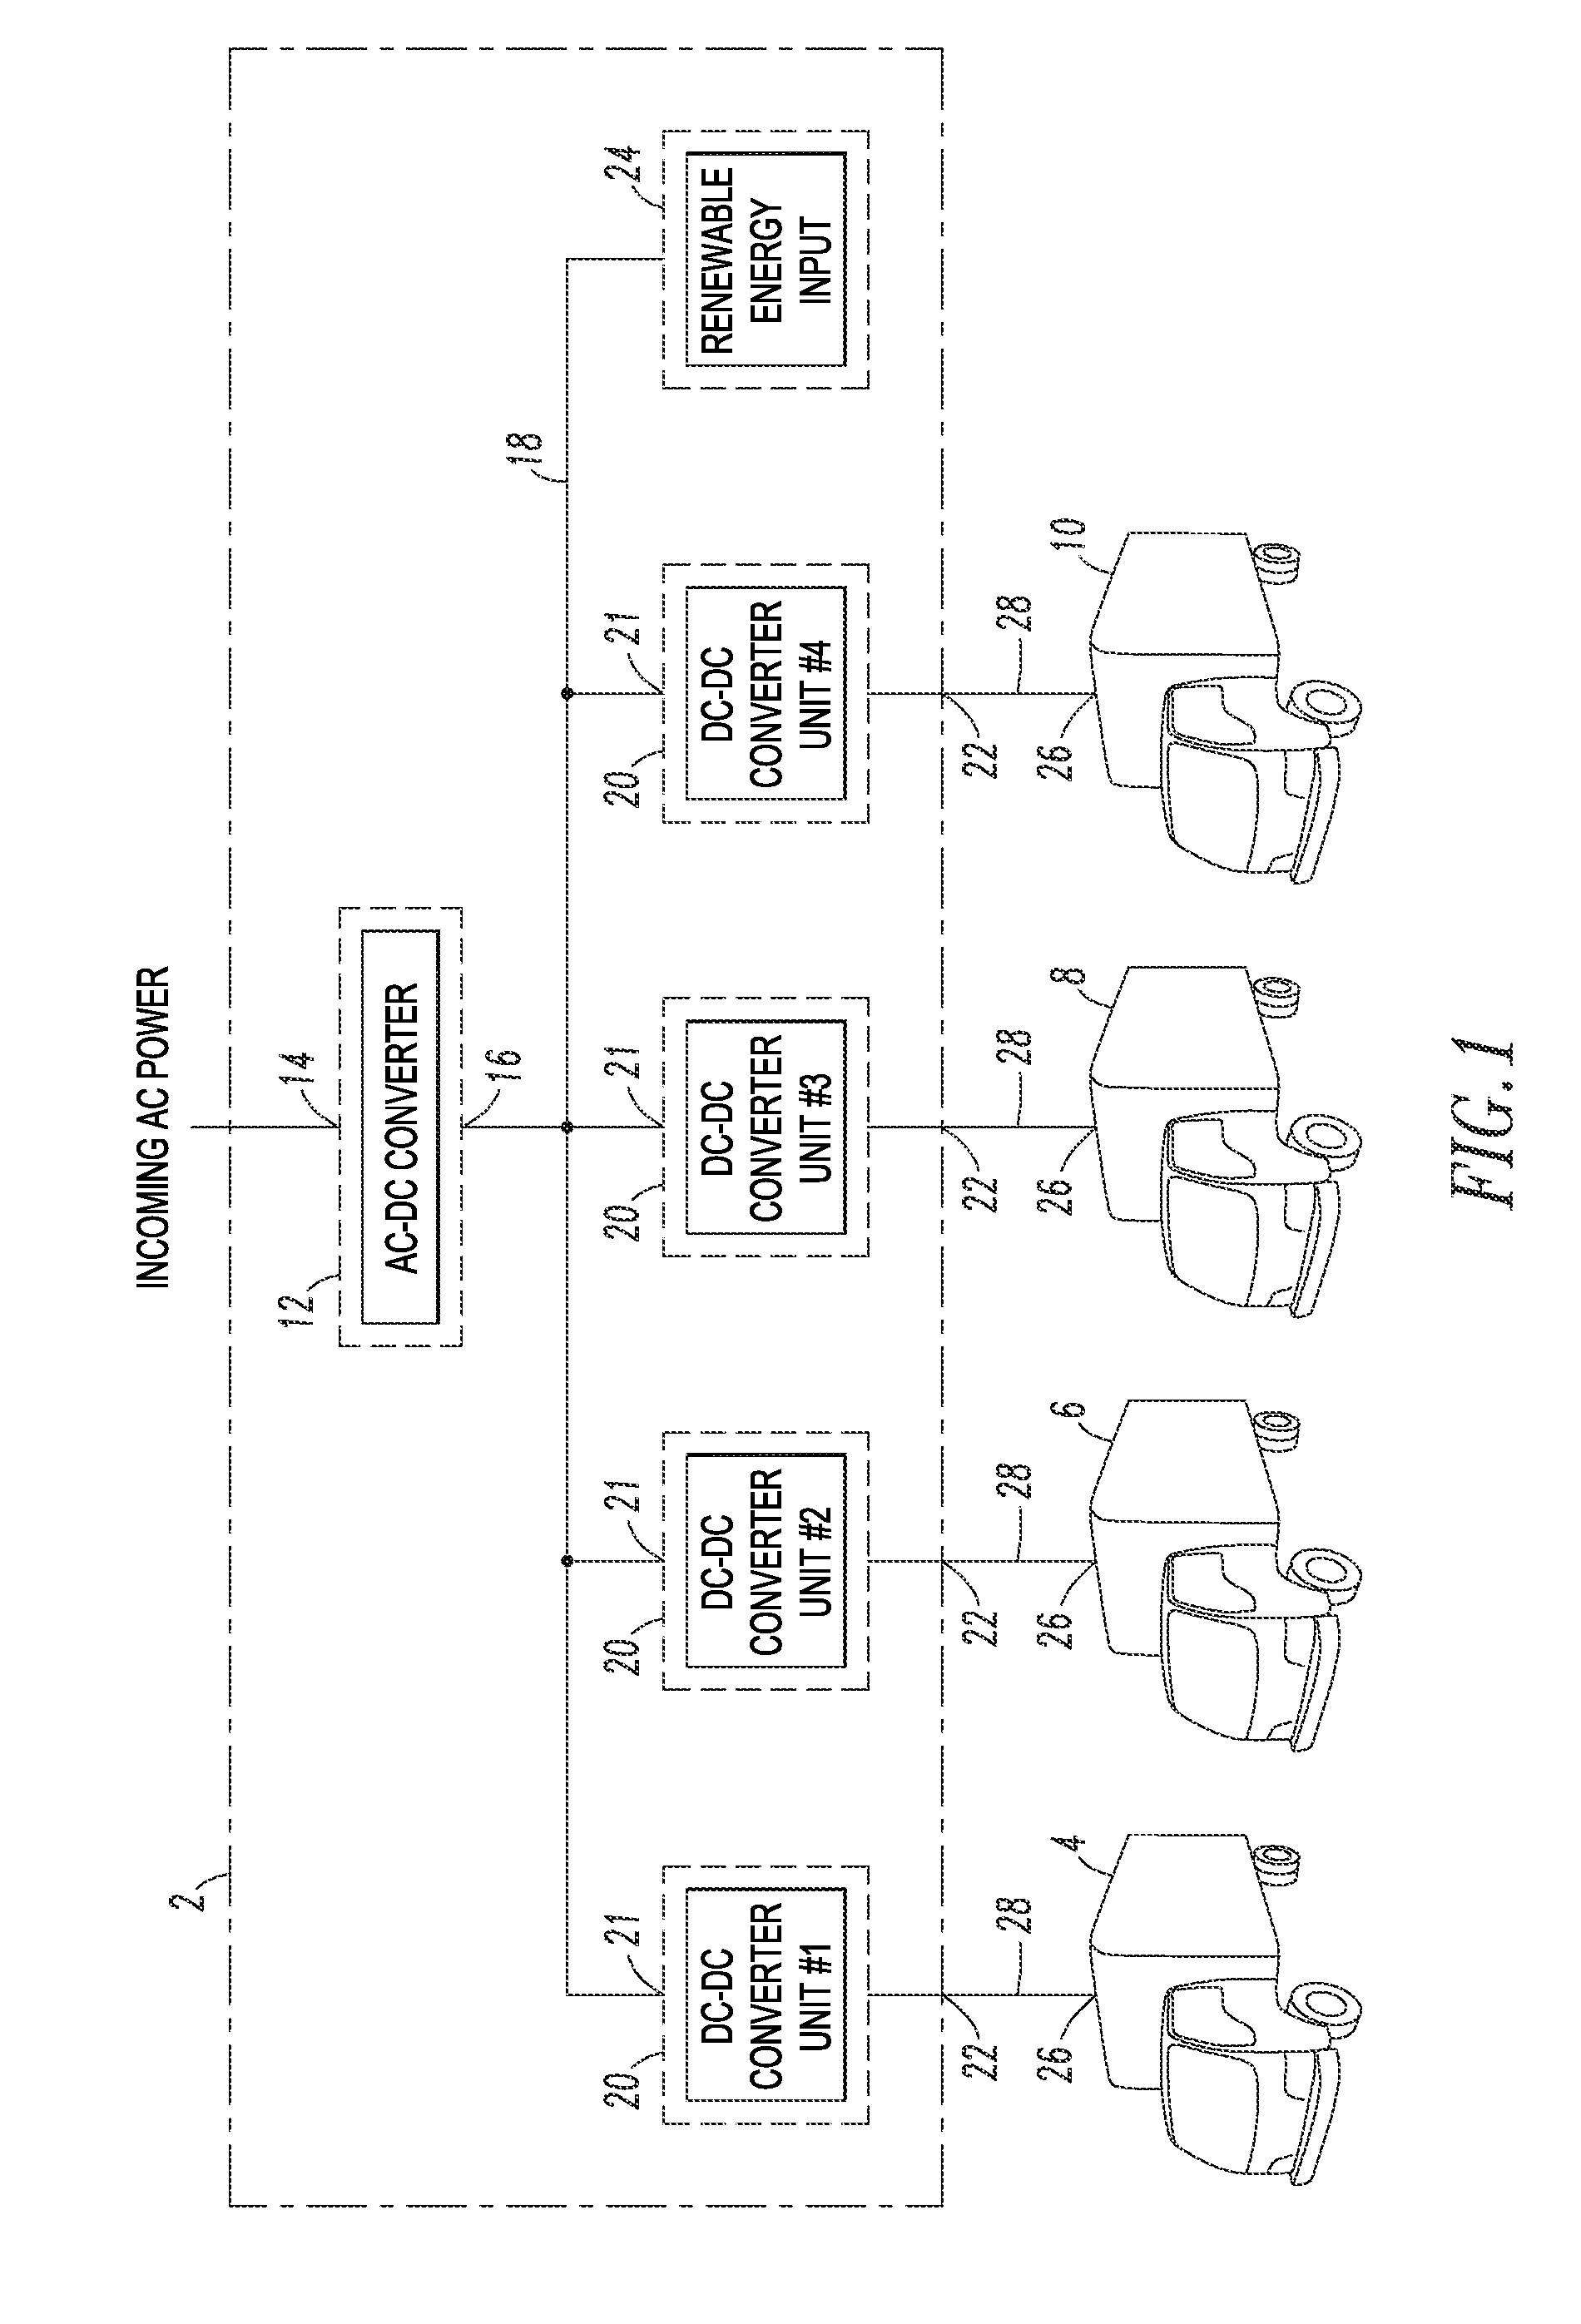 Electric vehicle supply equipment for electric vehicles